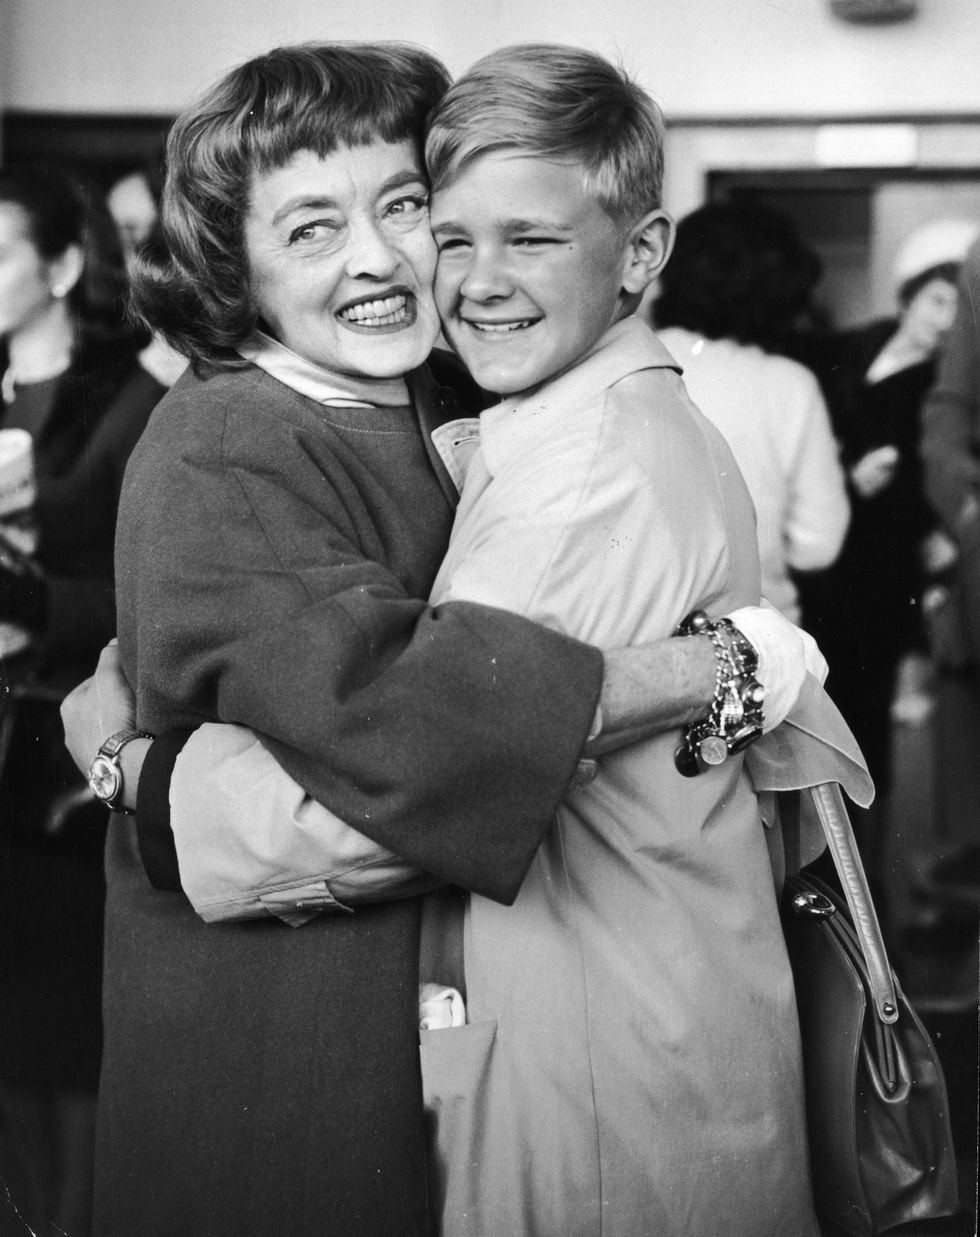 Bette Davis with her son, Michael.